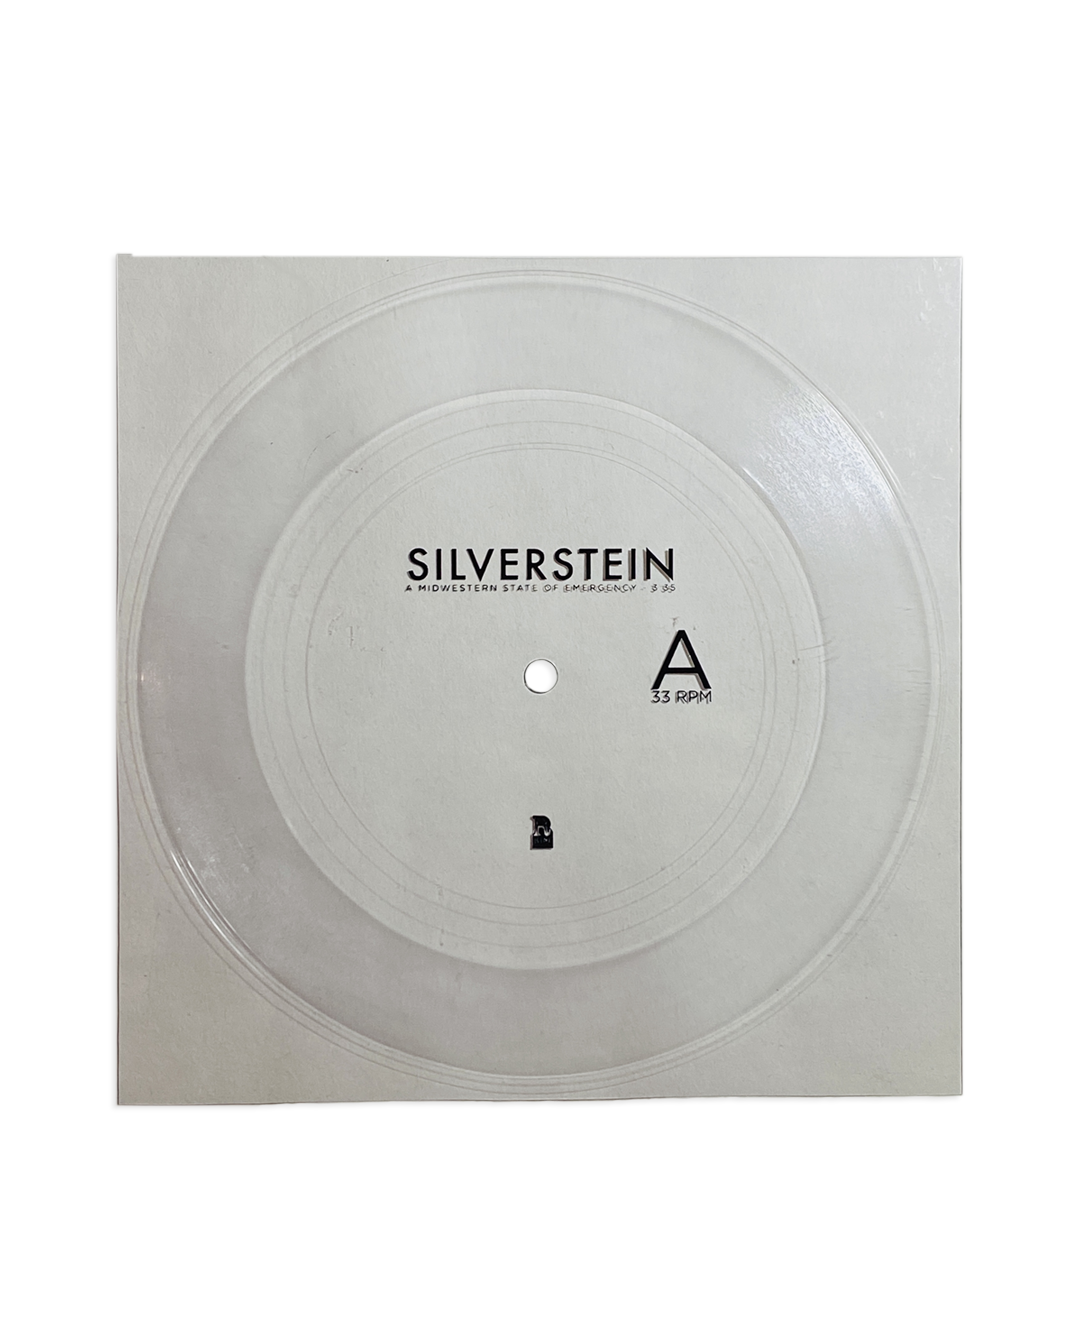 Silverstein A Midwestern State of Emergency Flexi